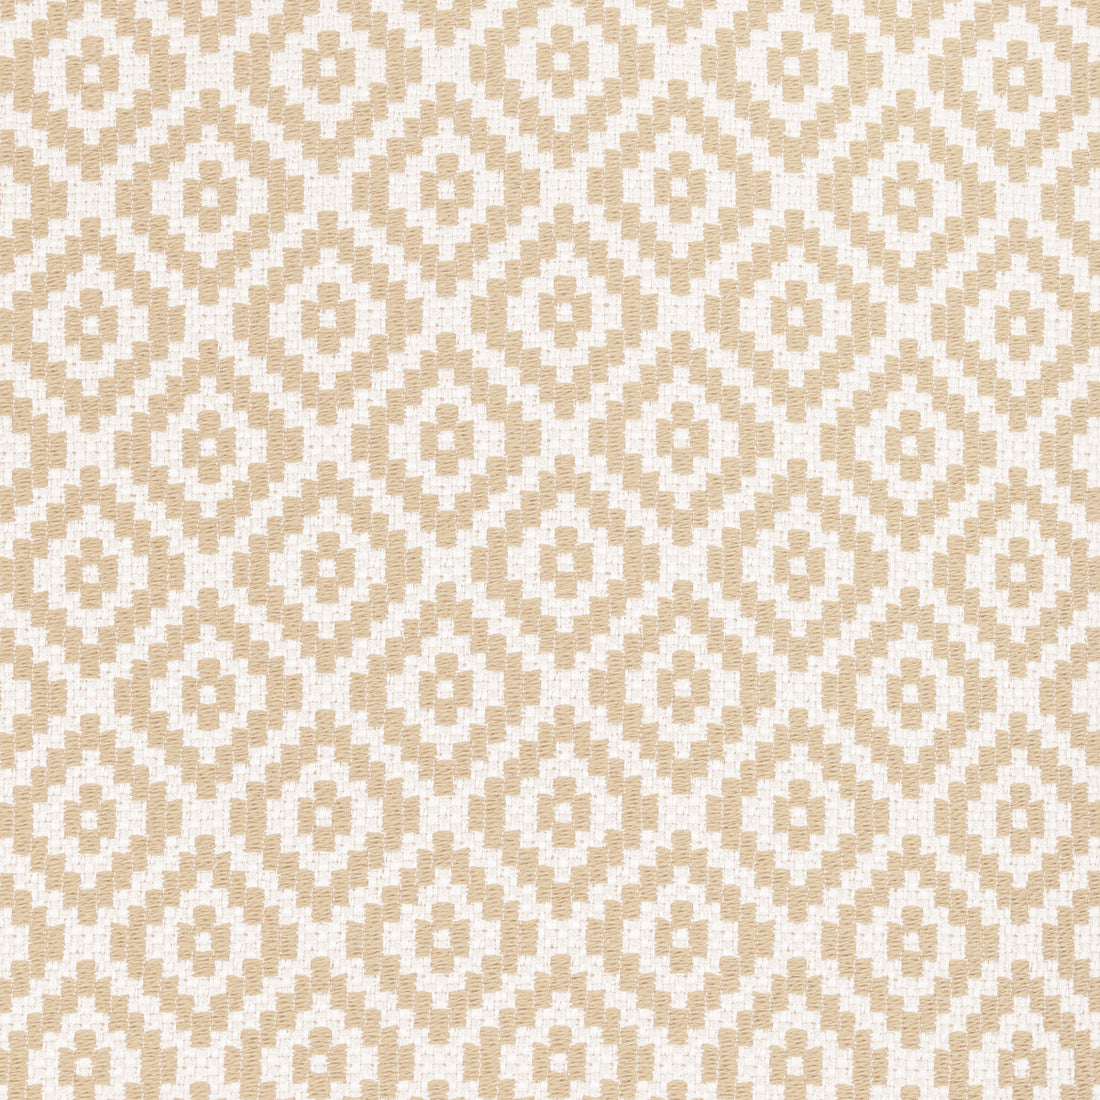 Kravet Design fabric in 36411-106 color - pattern 36411.106.0 - by Kravet Design in the Performance Crypton Home collection